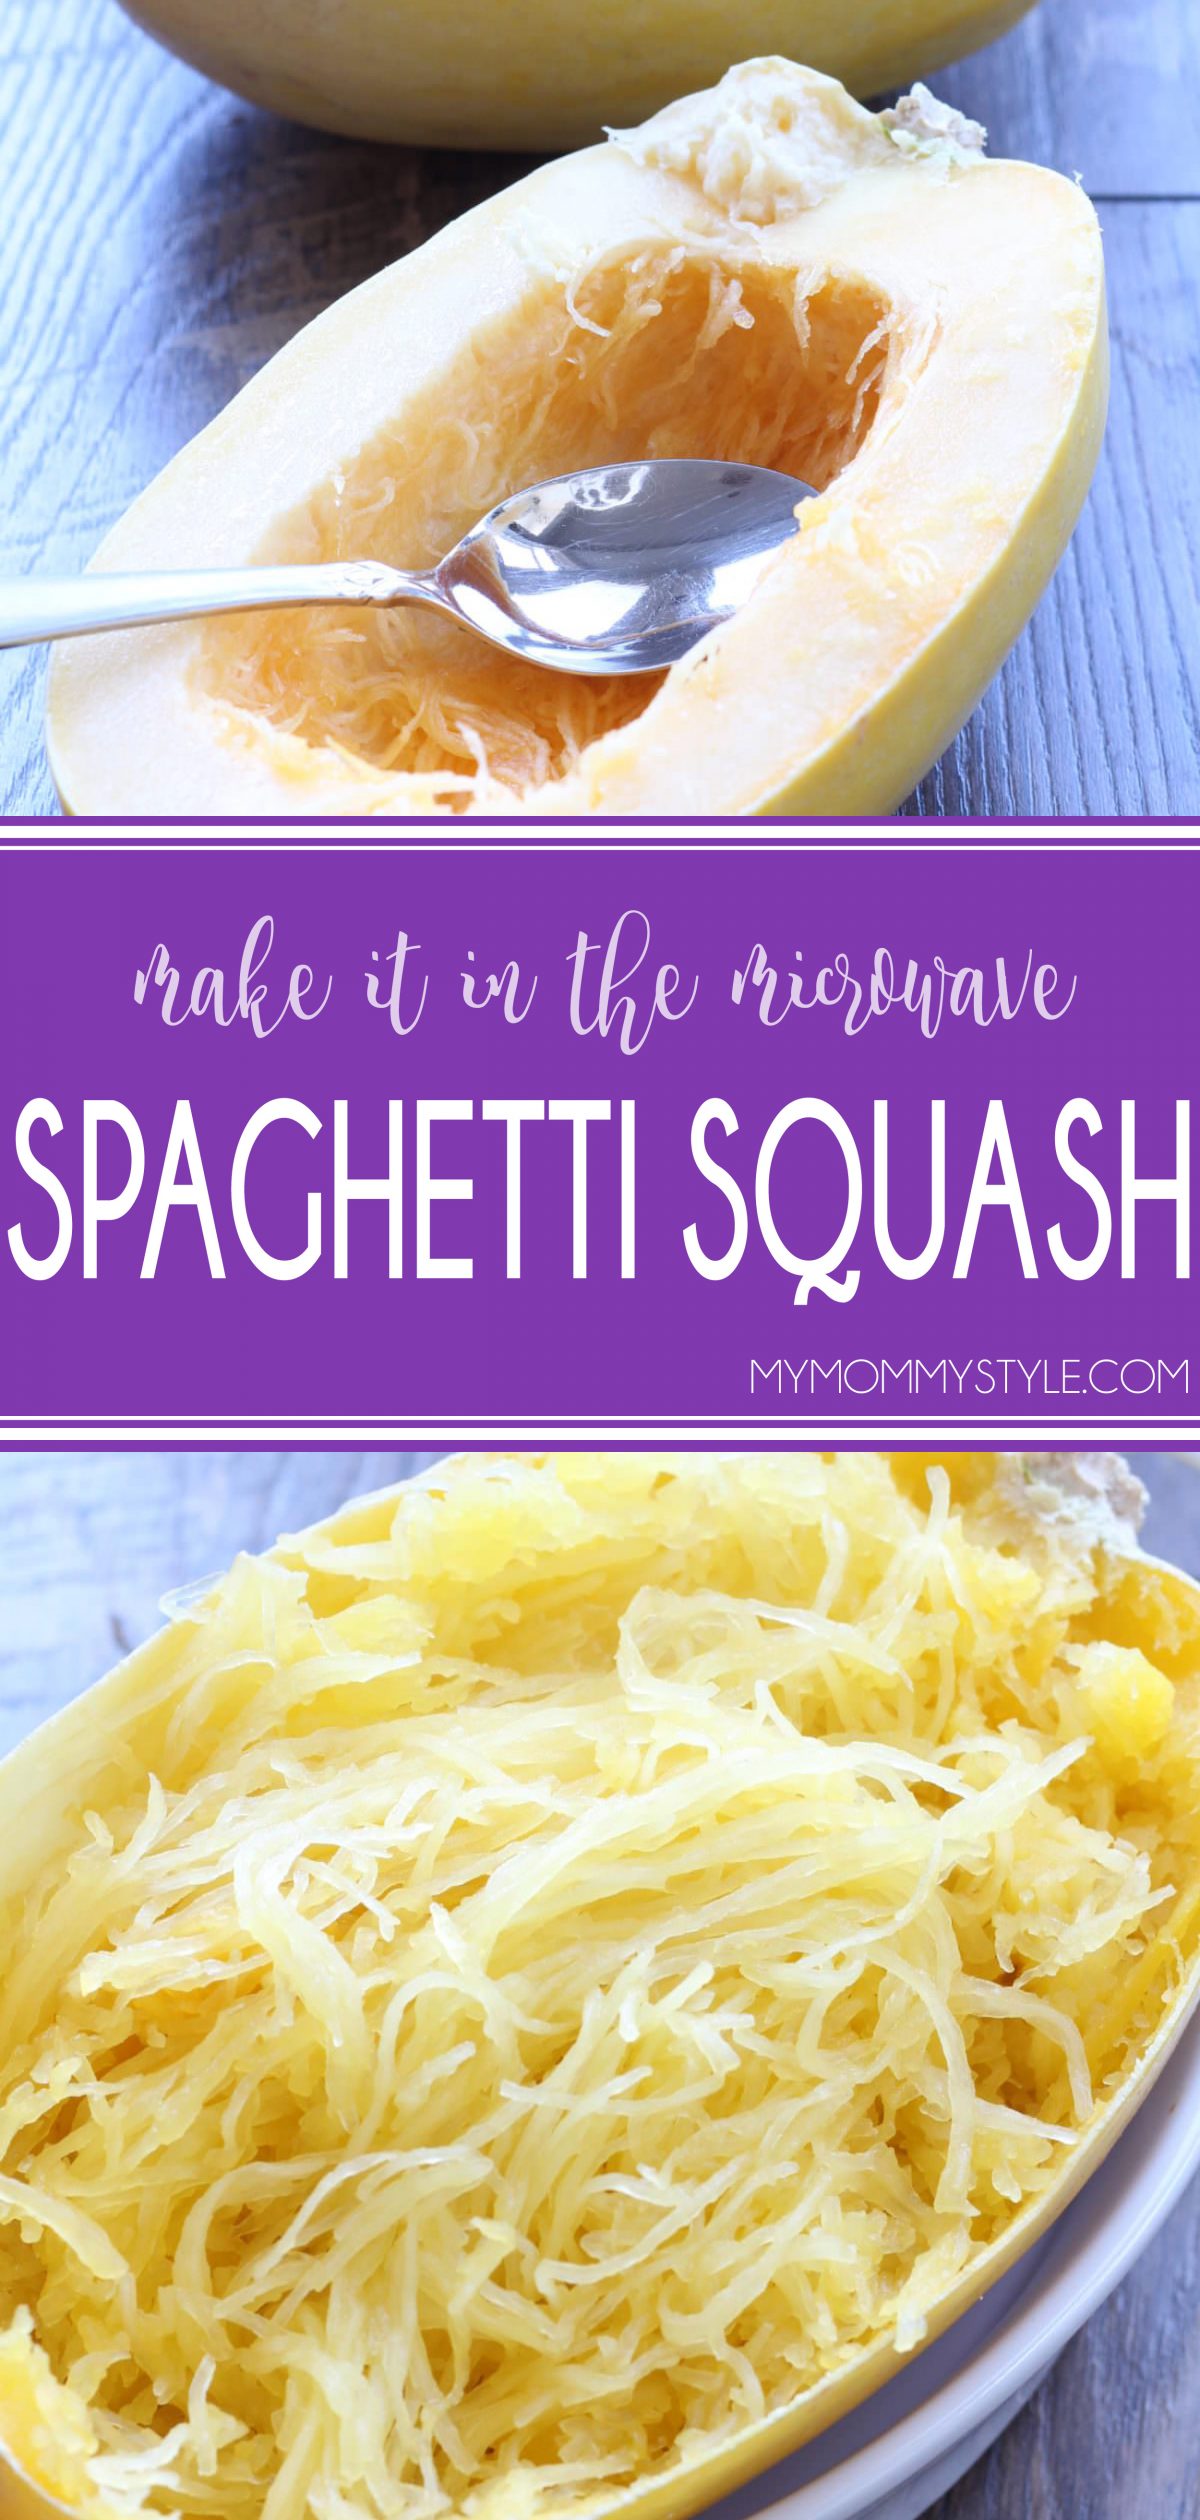 Make tender, healthy spaghetti squash quickly in the microwave. via @mymommystyle